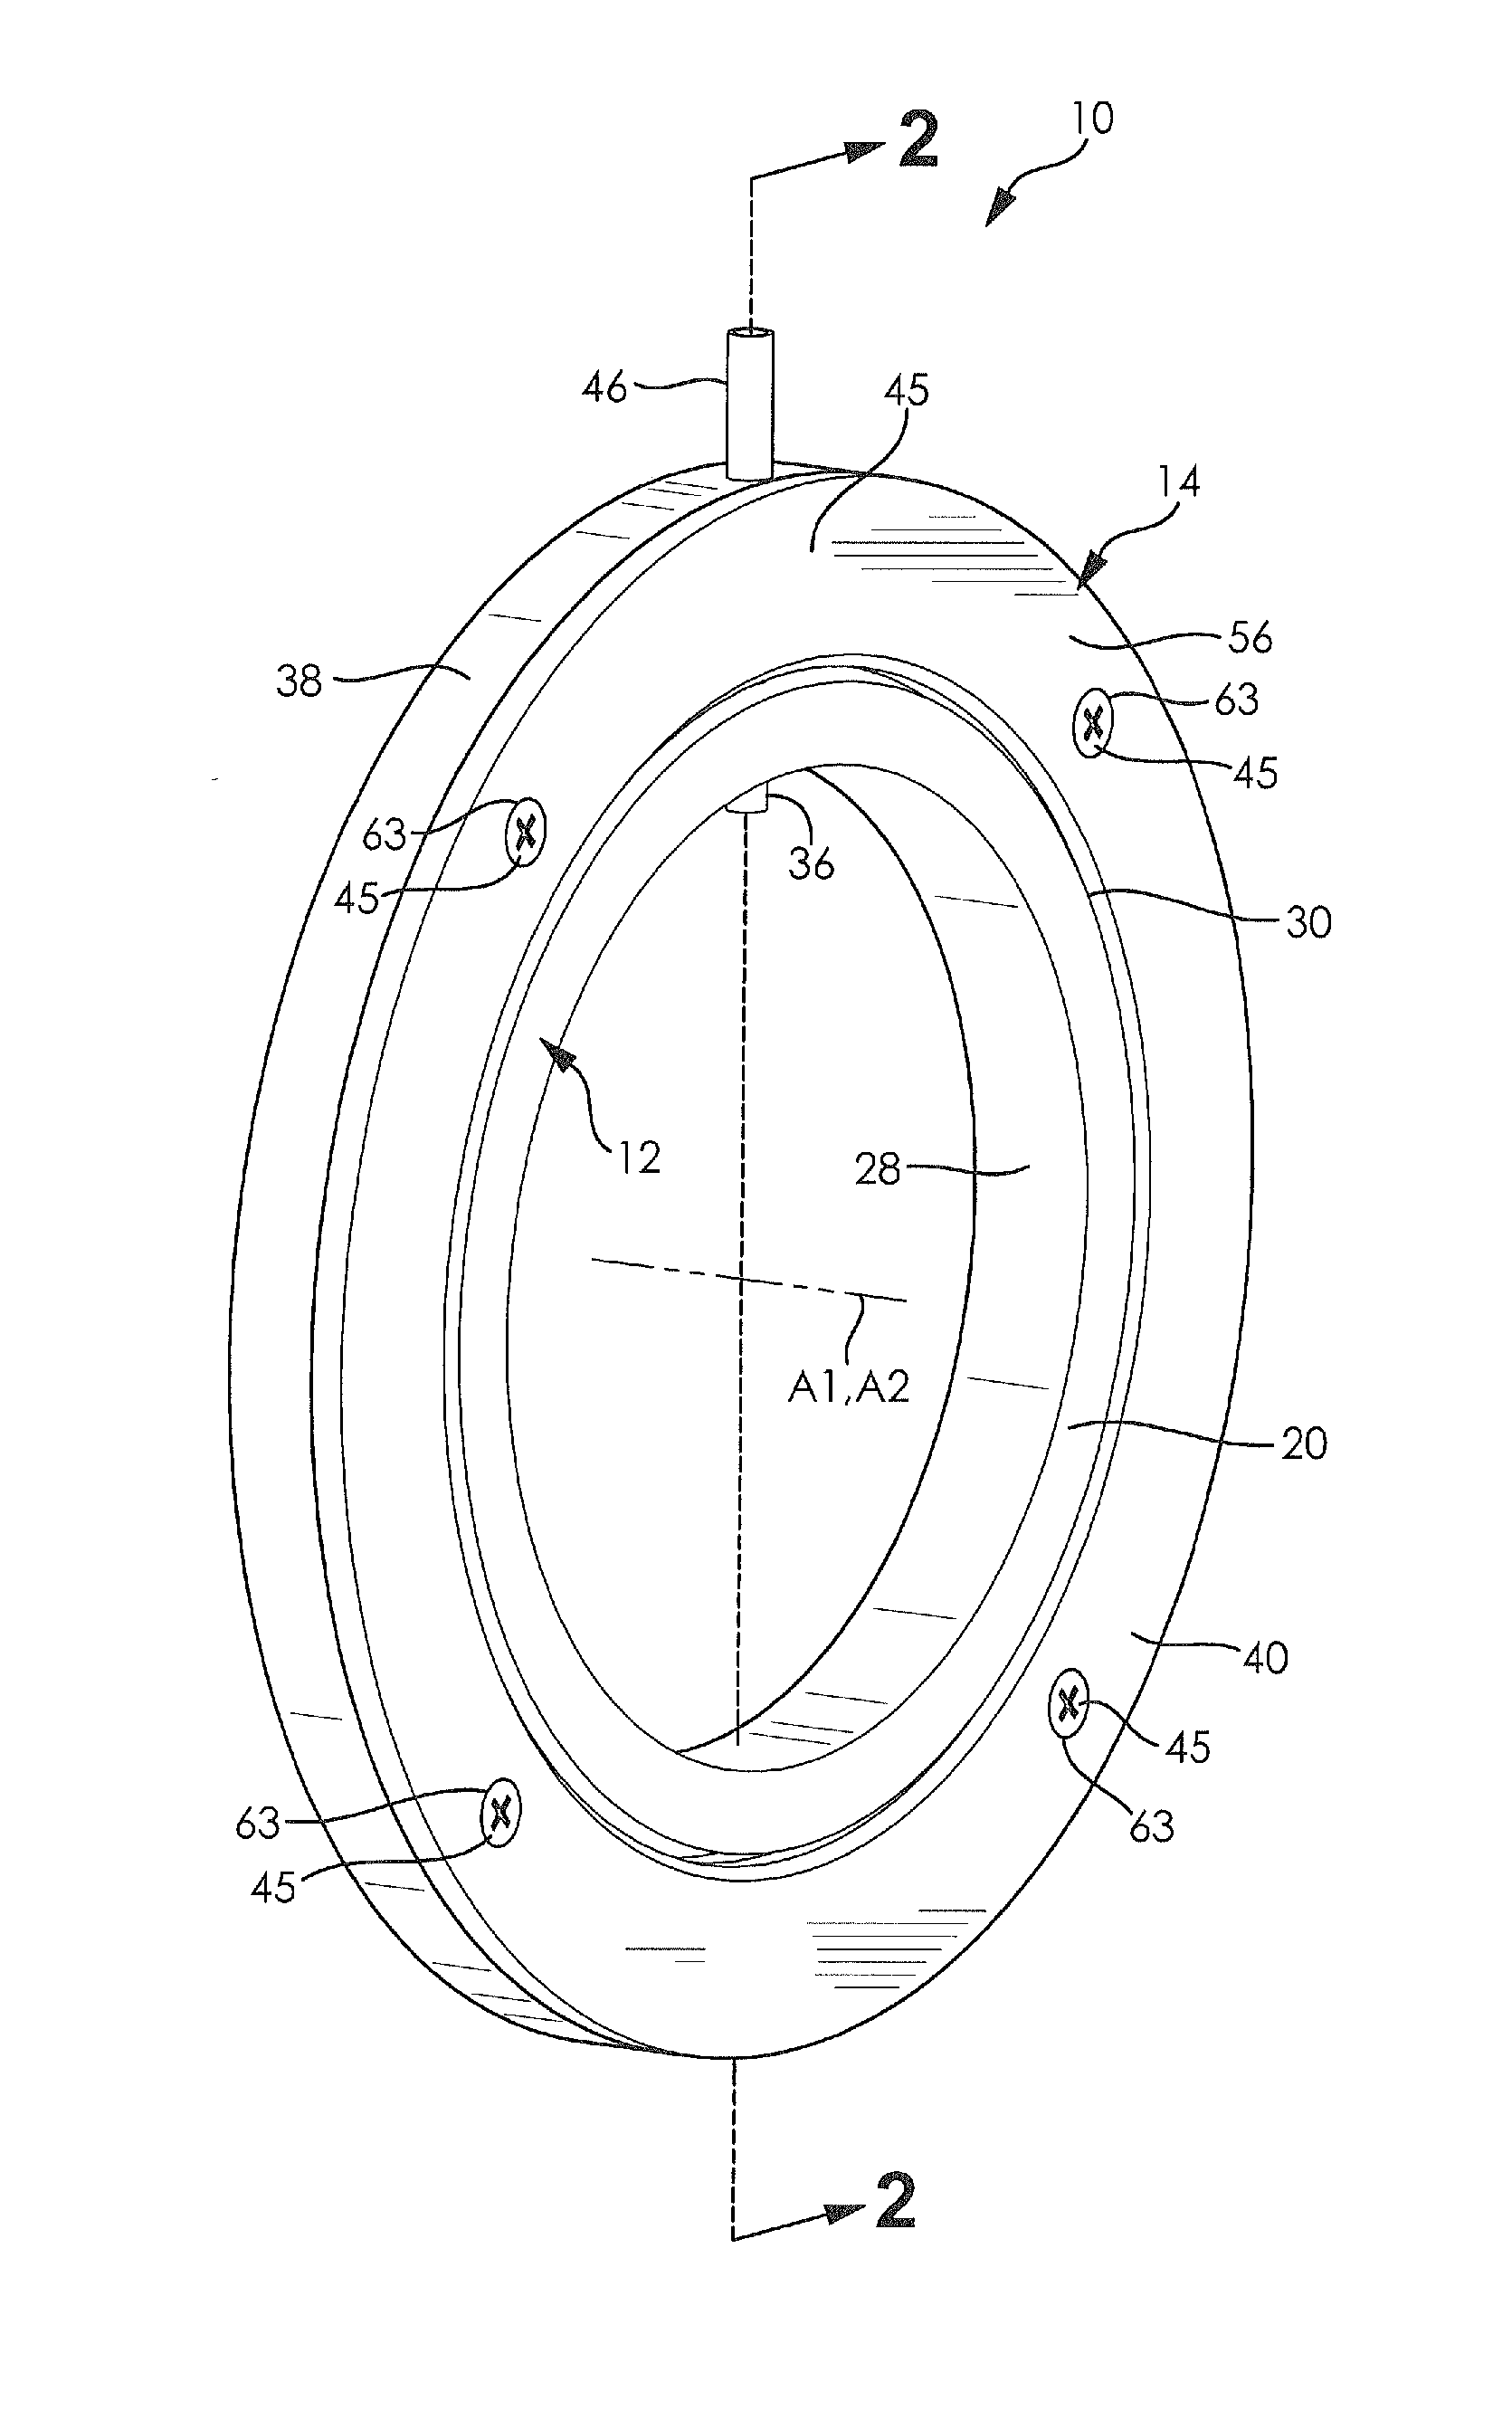 Rotary union for use with a fluid conduit